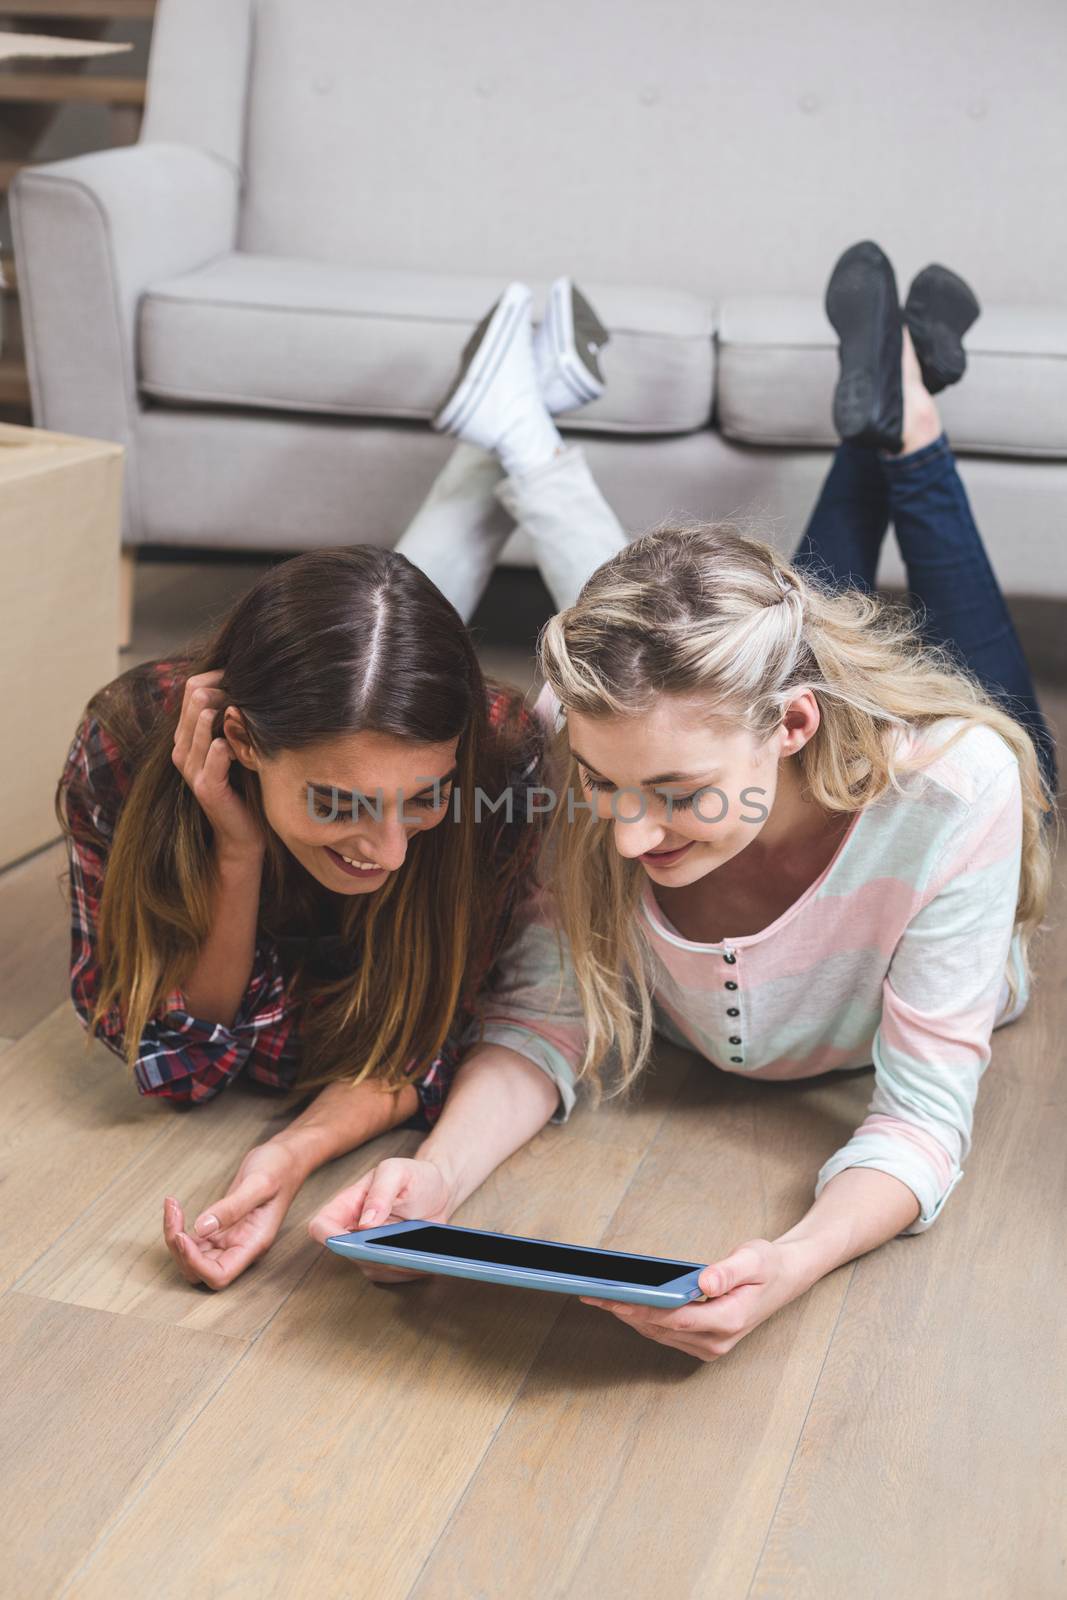 Friends lying together on the floor and using digital tablet in their new house